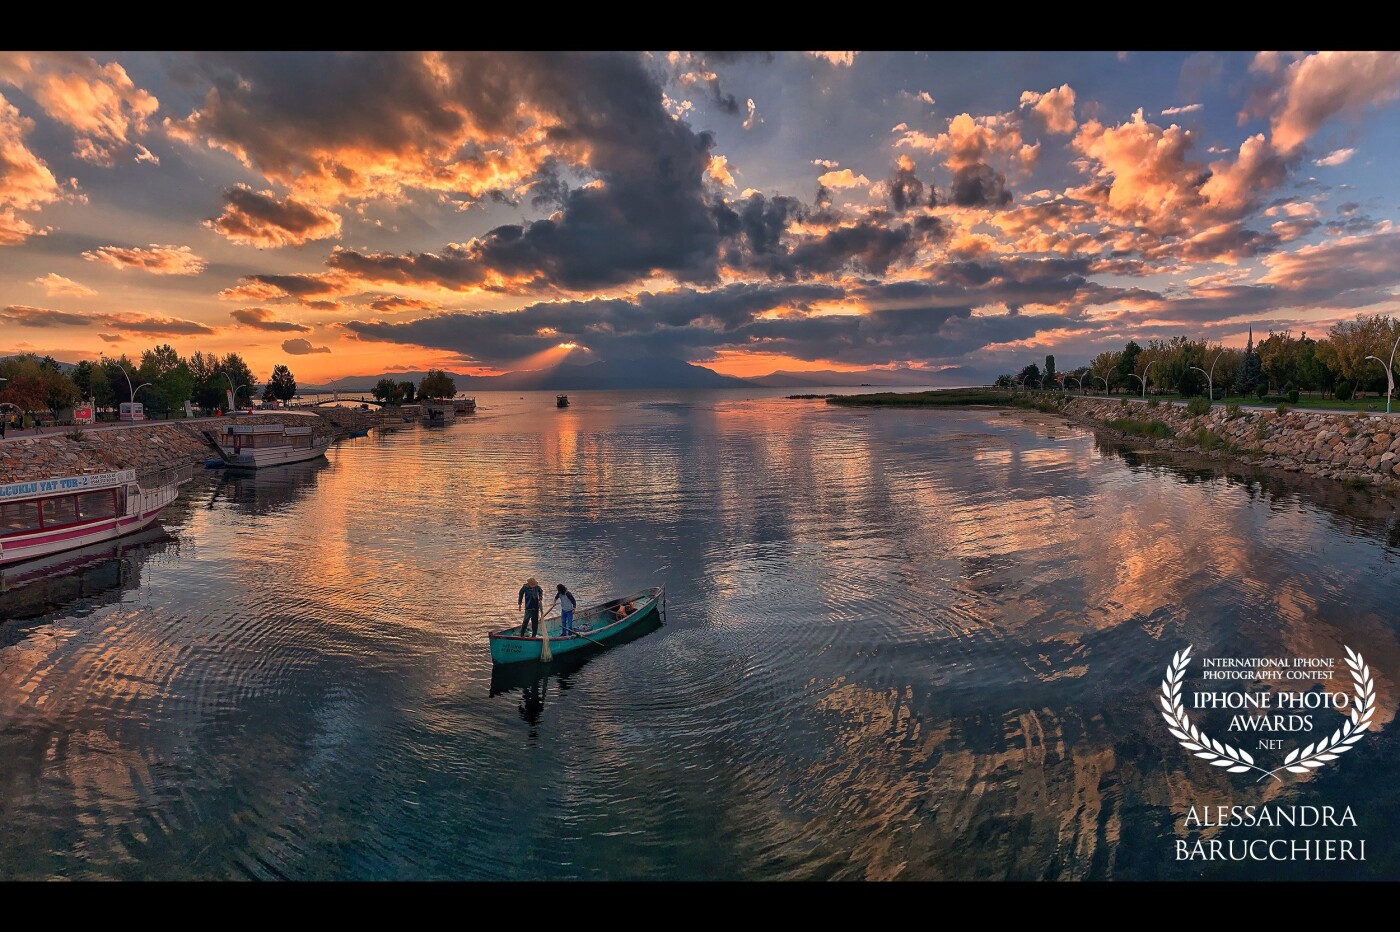 Beyşehir Lake, Turkey<br />
On the waters of Lake Beyşehir, gilded by sunset, boats come out for daily fishing<br />
Sulle acque del lago di Beyşehir, dorate dal tramonto, le barche escono per la pesca giornaliera